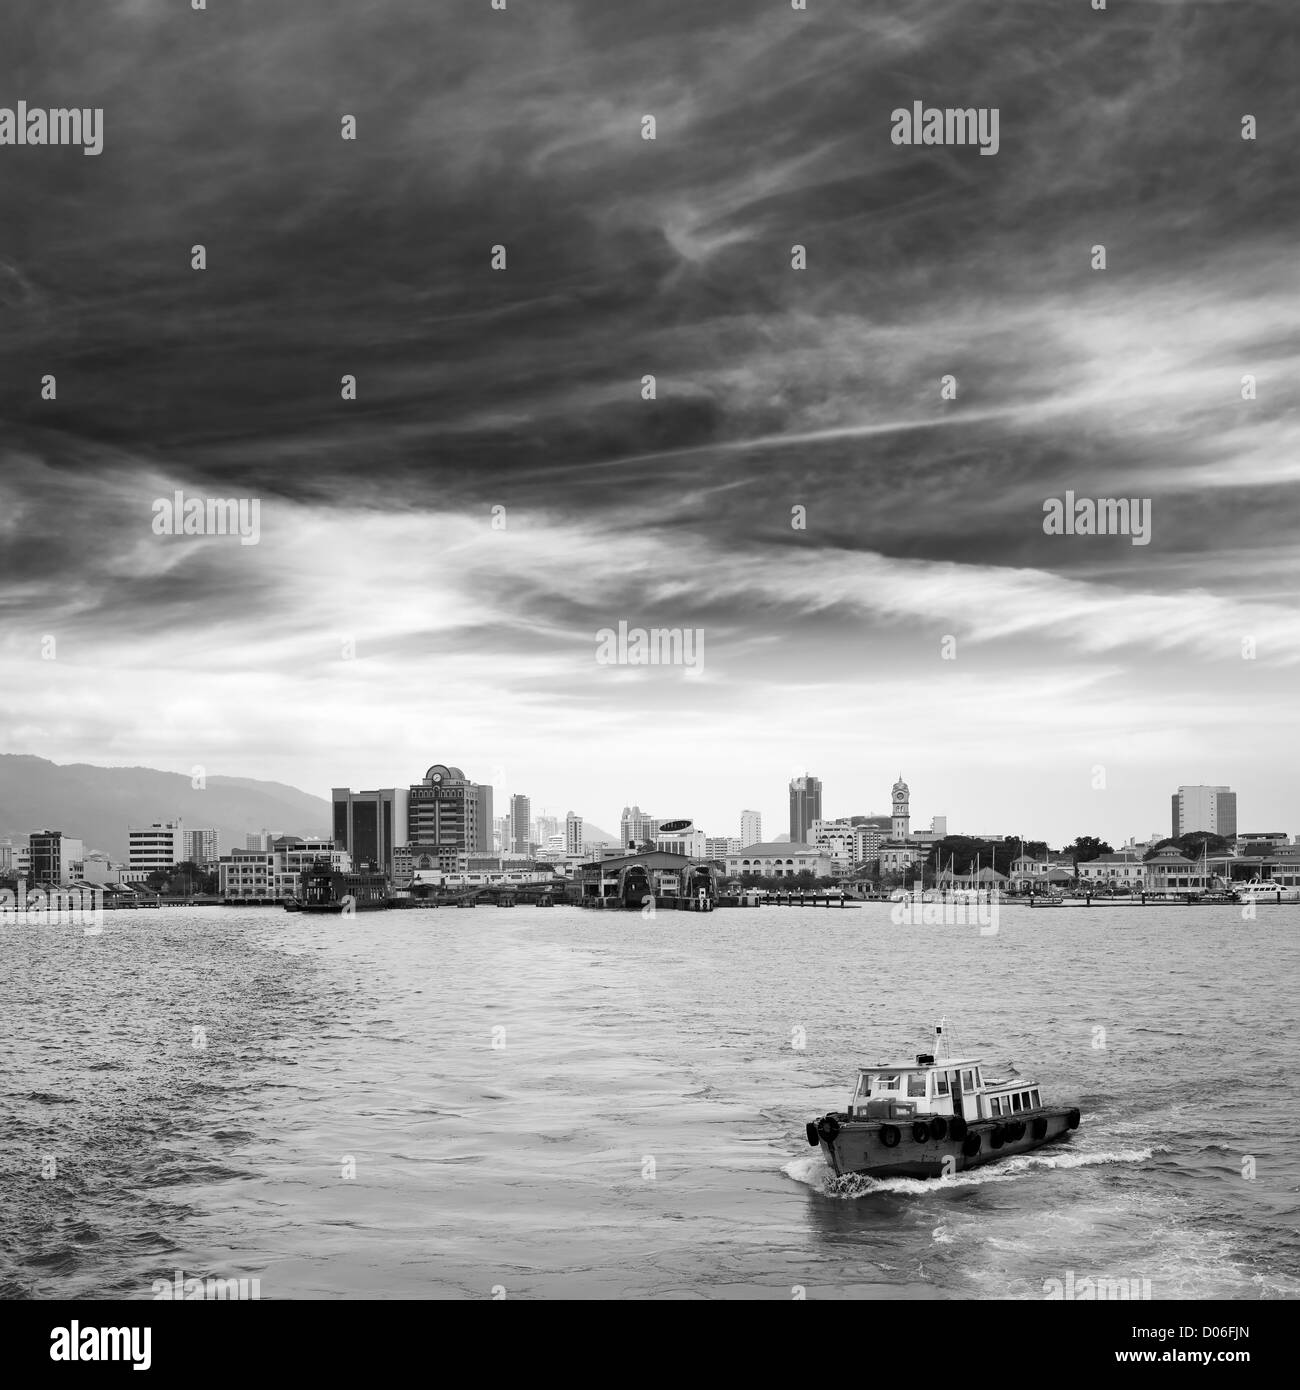 City bay with single boat and skyscrapers in Penang, Malaysia, Asia. Stock Photo